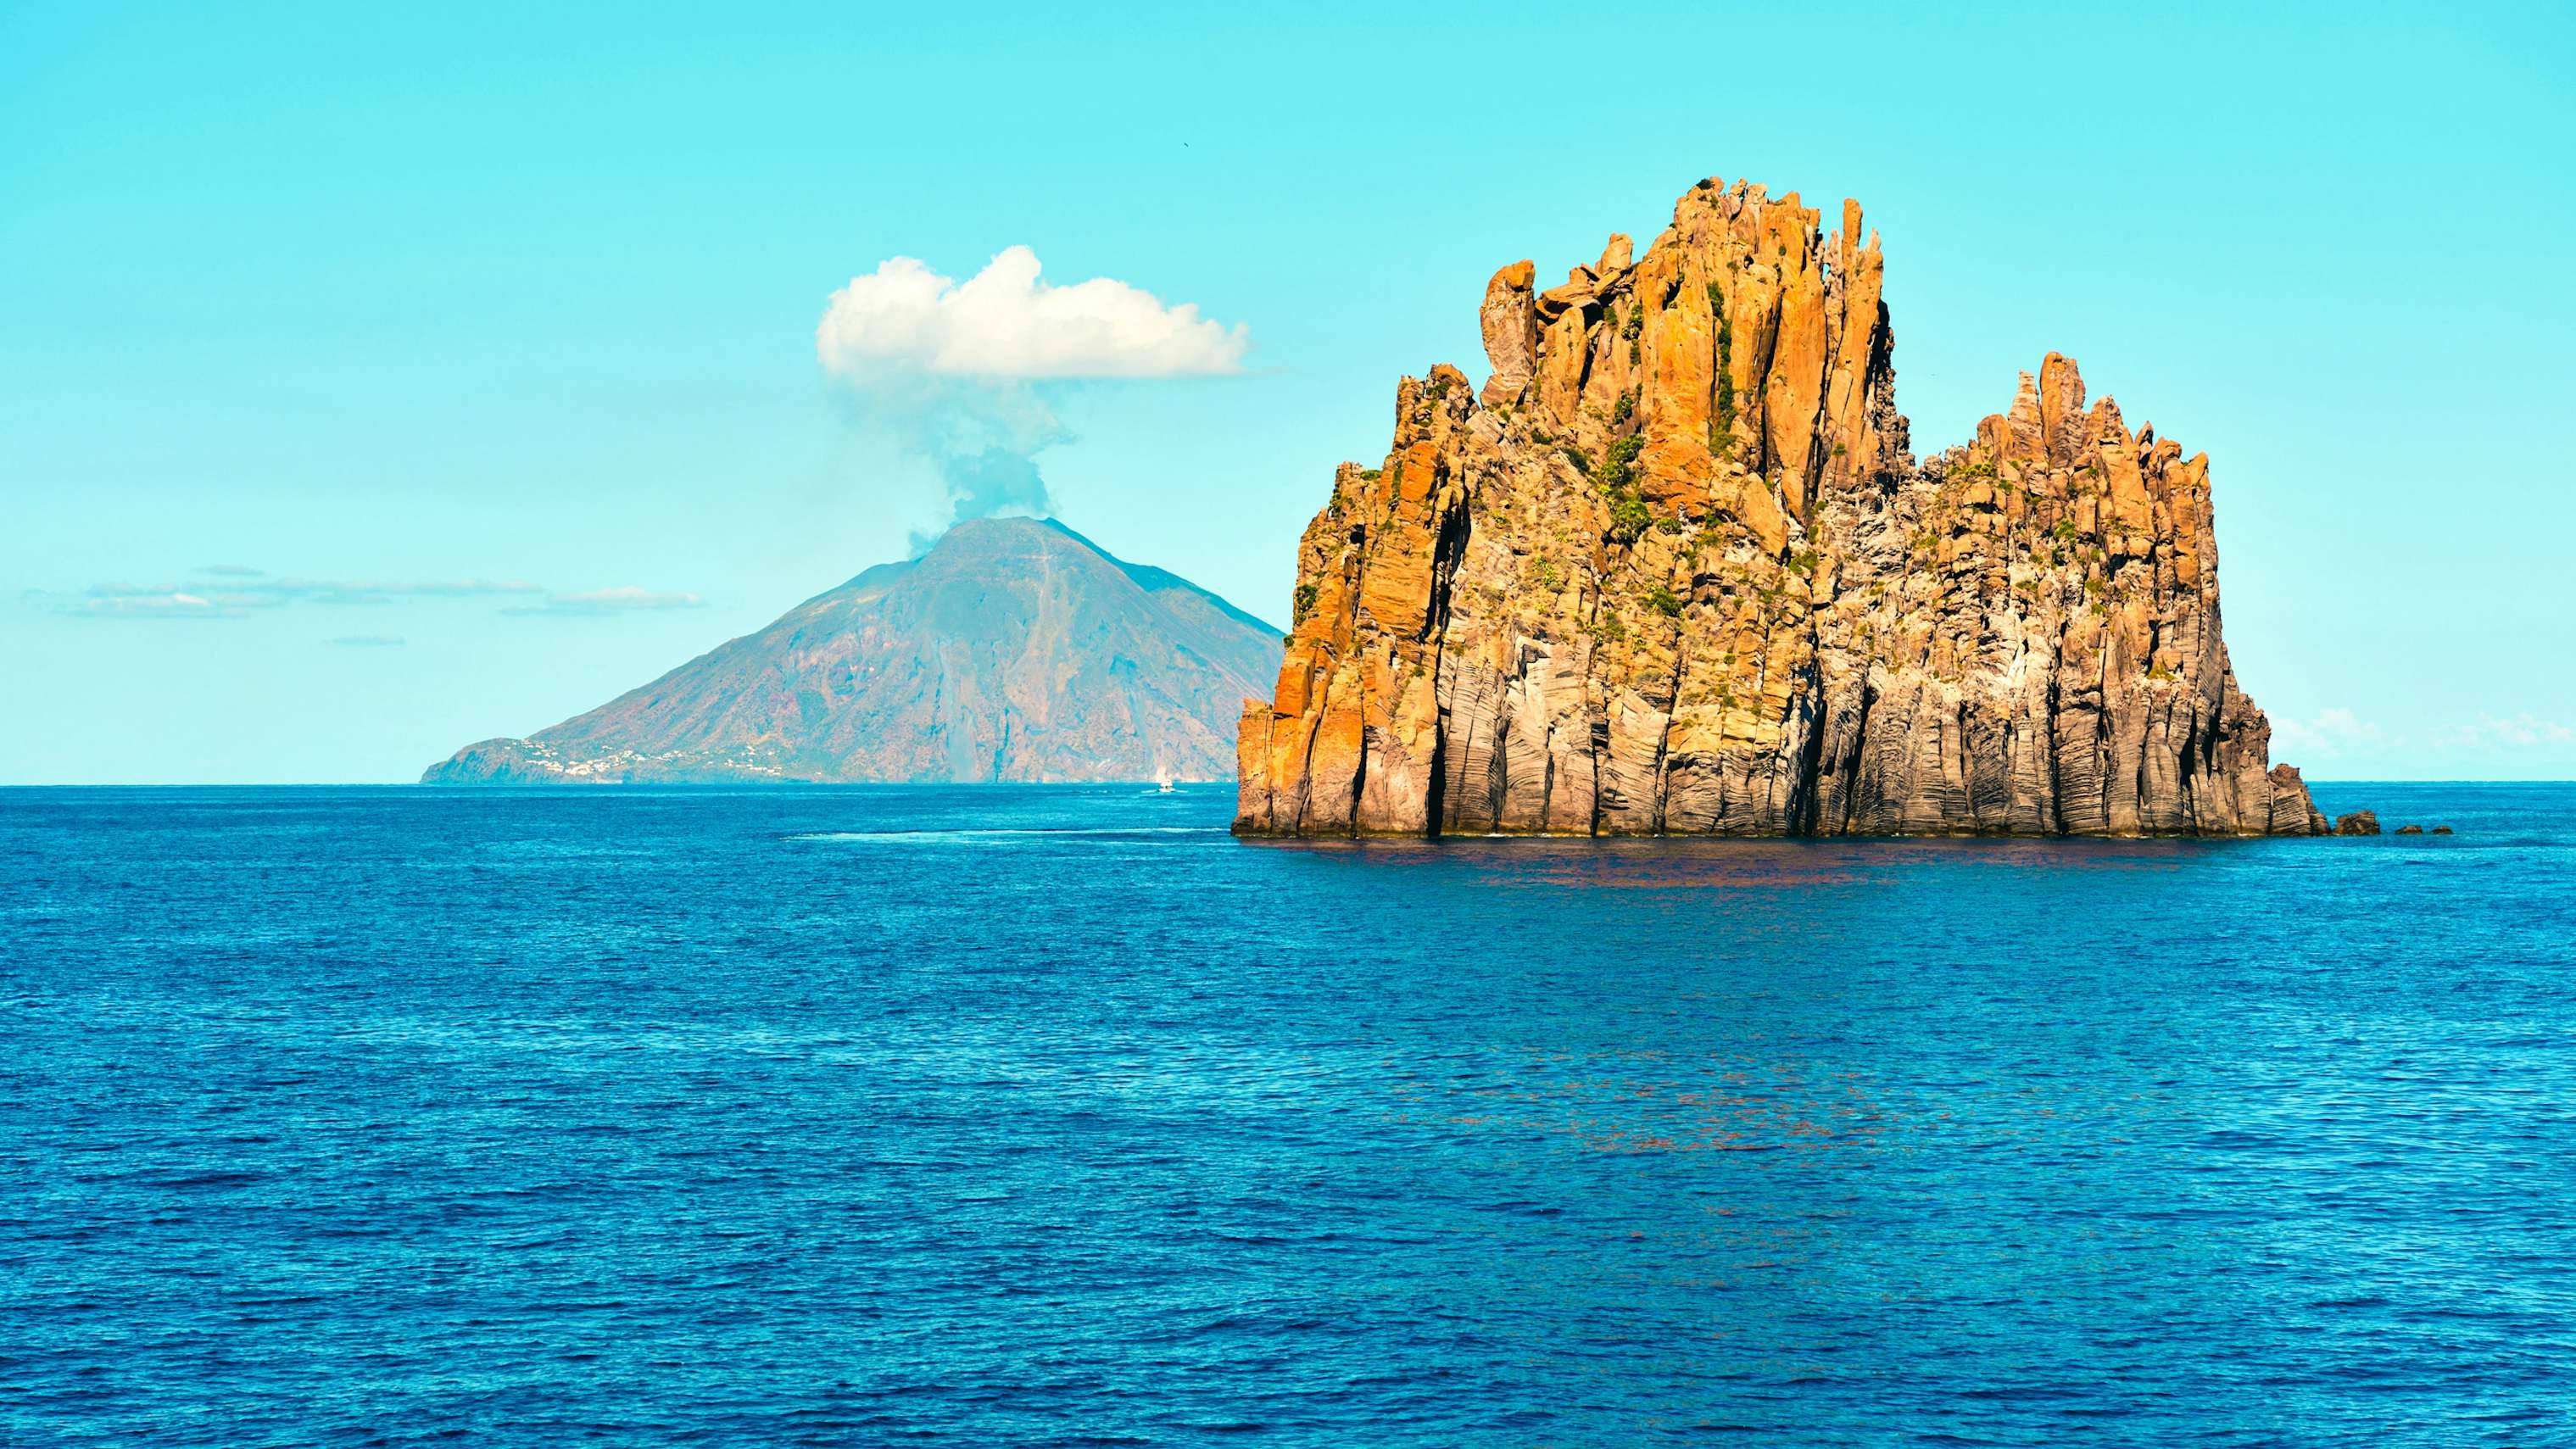 Majestic rock formations rise from the sea with the smoking Stromboli volcano in the background.